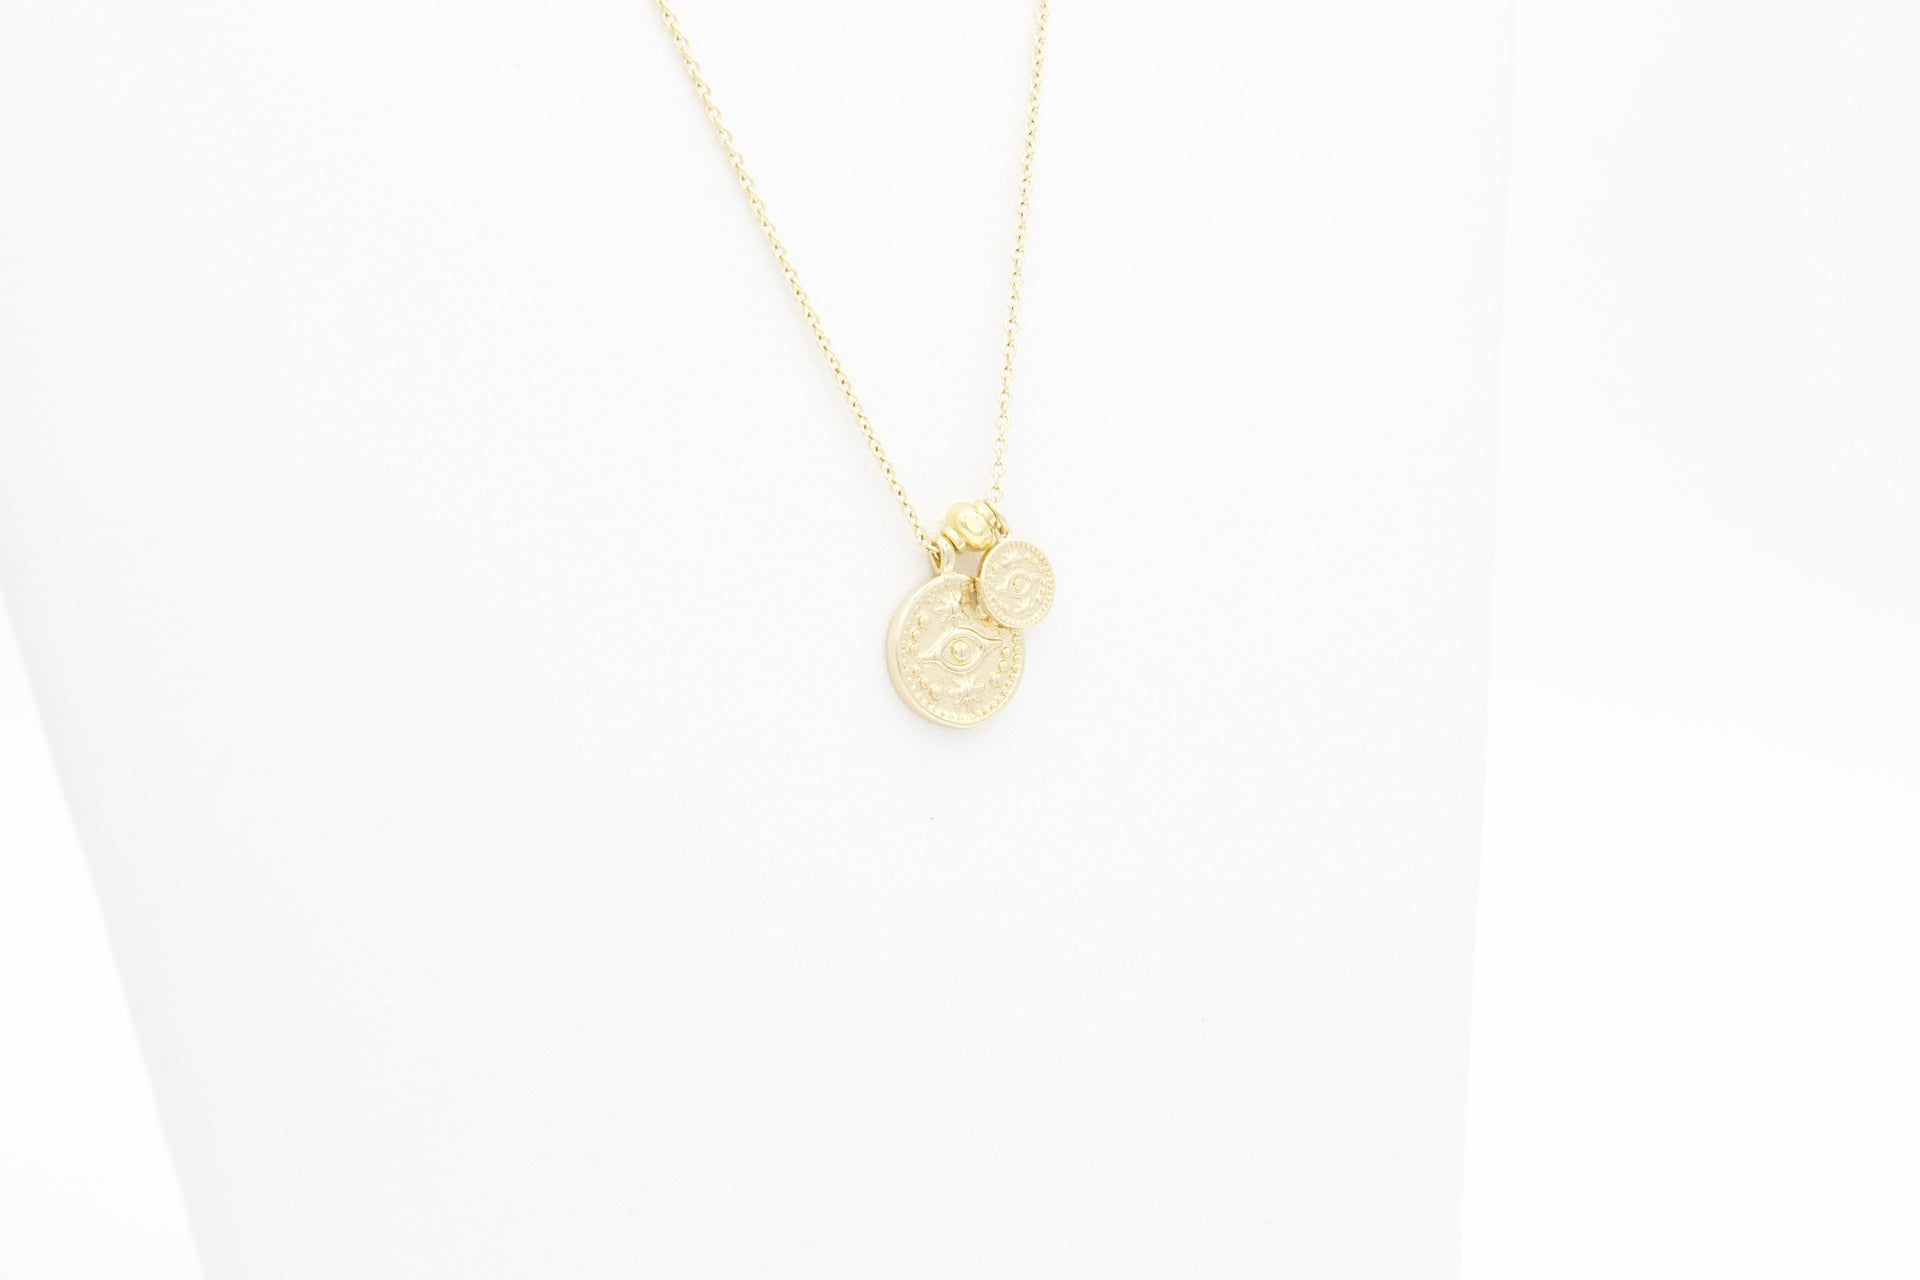 Gold filled evil eye coin charm necklace. Australian jewellery brand AW Boutique.